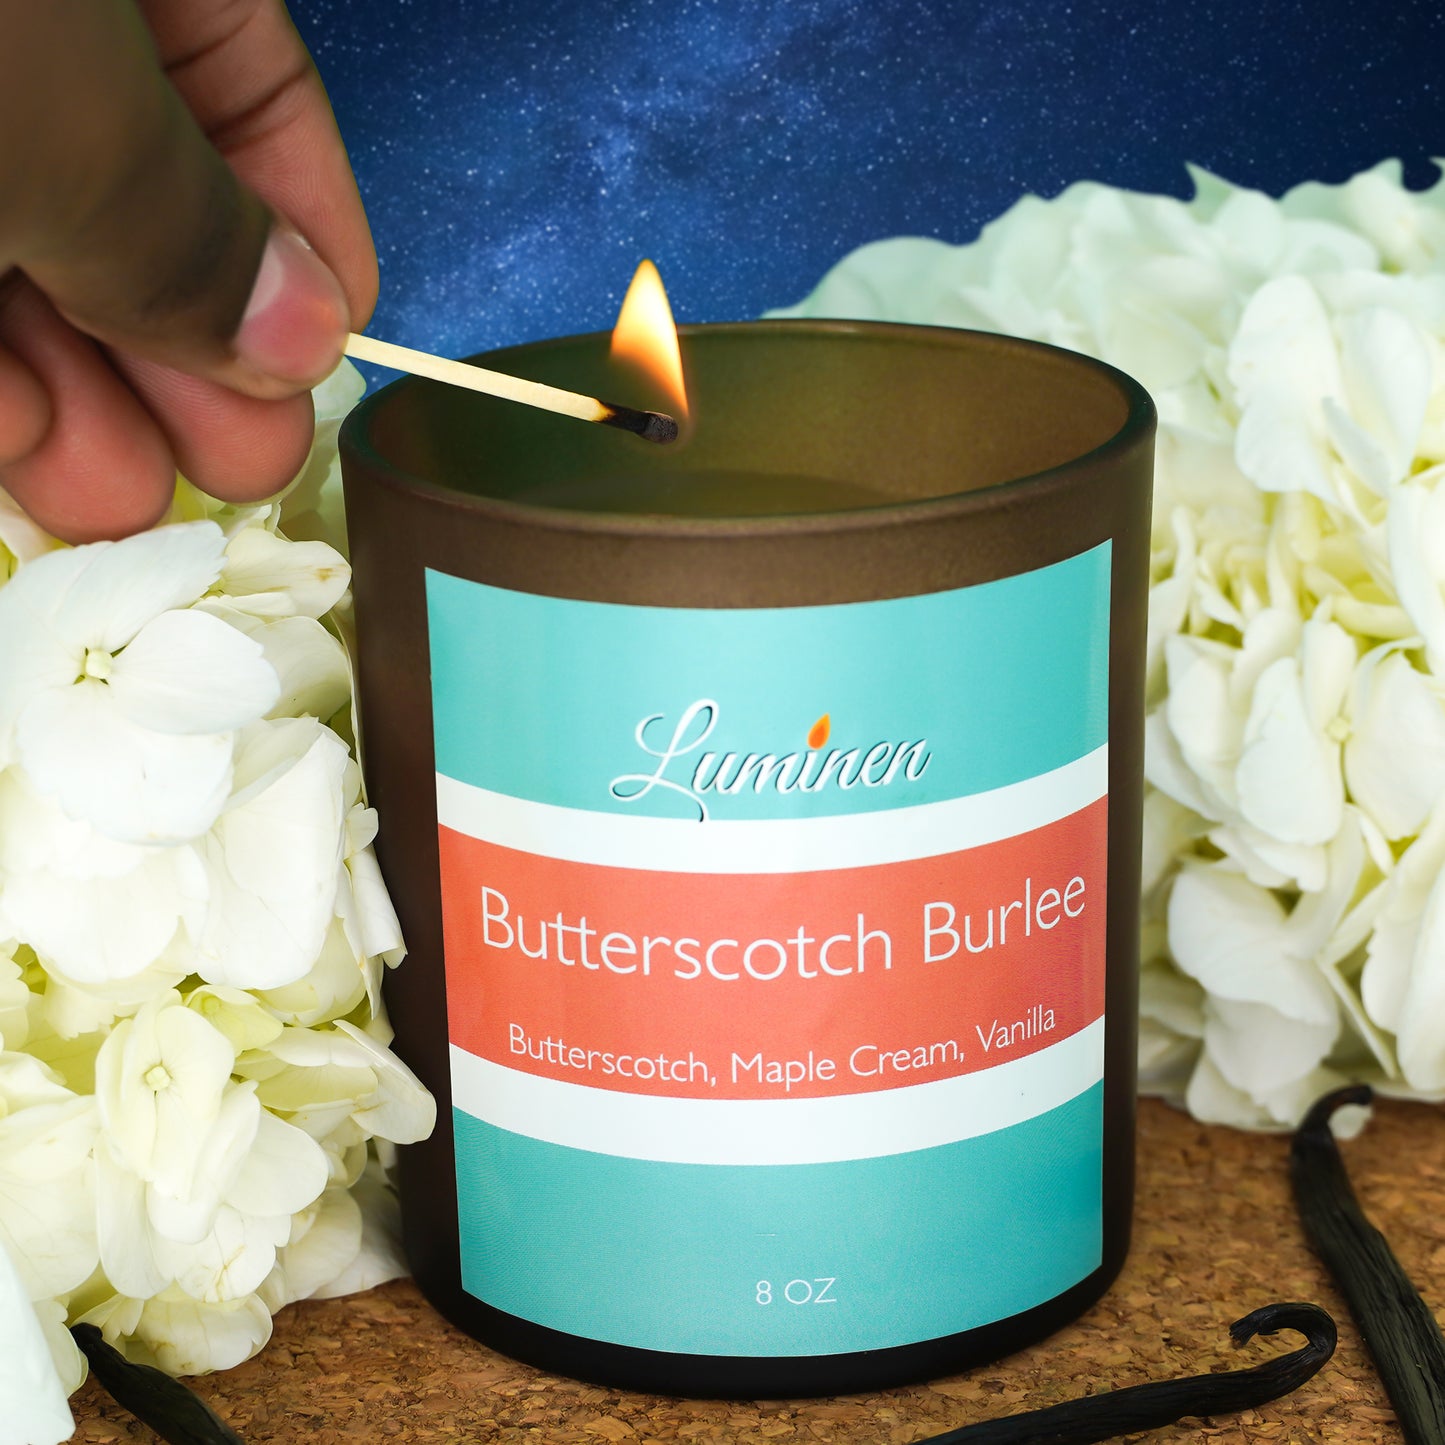 A brown candle named Butterscotch Burlee with a star filled background, flowers and vanilla sticks being lit with a match